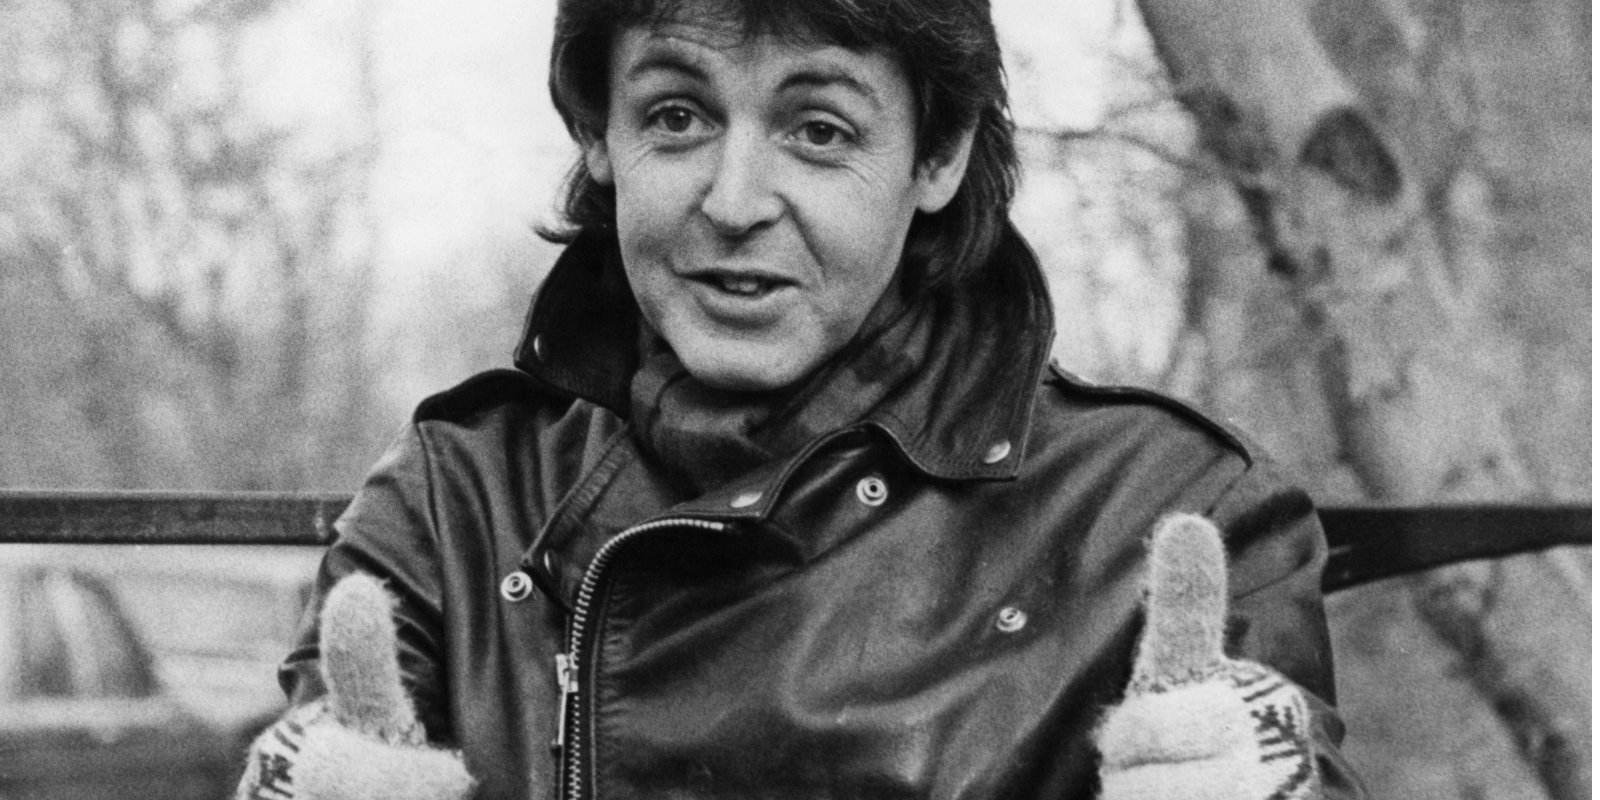 Paul McCartney gives a thumbs up to the press at his farmhouse near Rye, Sussex, after being deported from Japan for bringing drugs into the country on a concert tour with his group Wings, 28th January 1980.